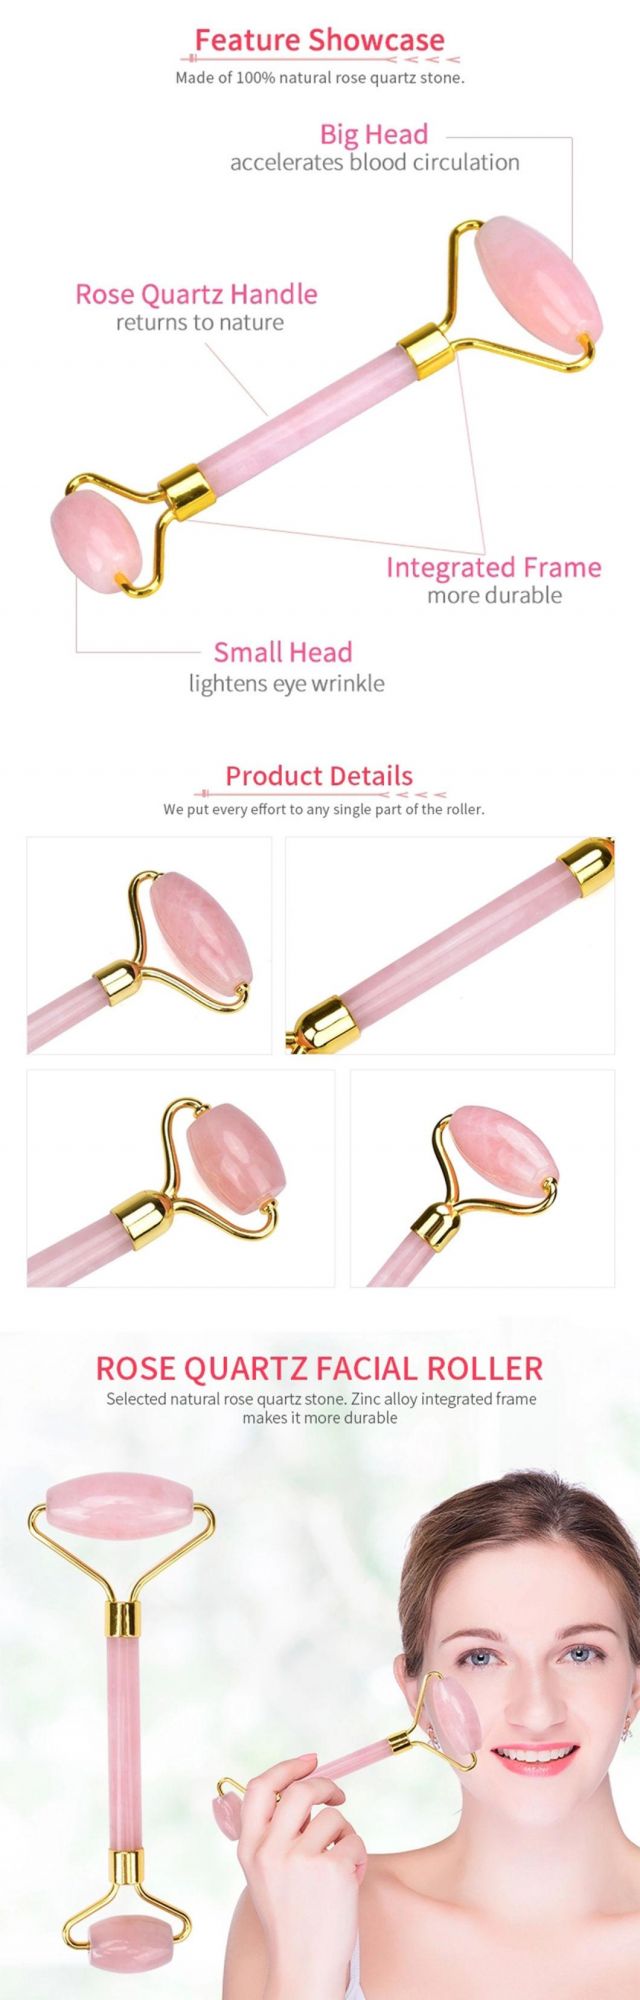 Ice Cold Stainless Steel Facejade Beauty Roller Facial Jade Roller Double Head Rose Quartz Massage Roller with Teeth